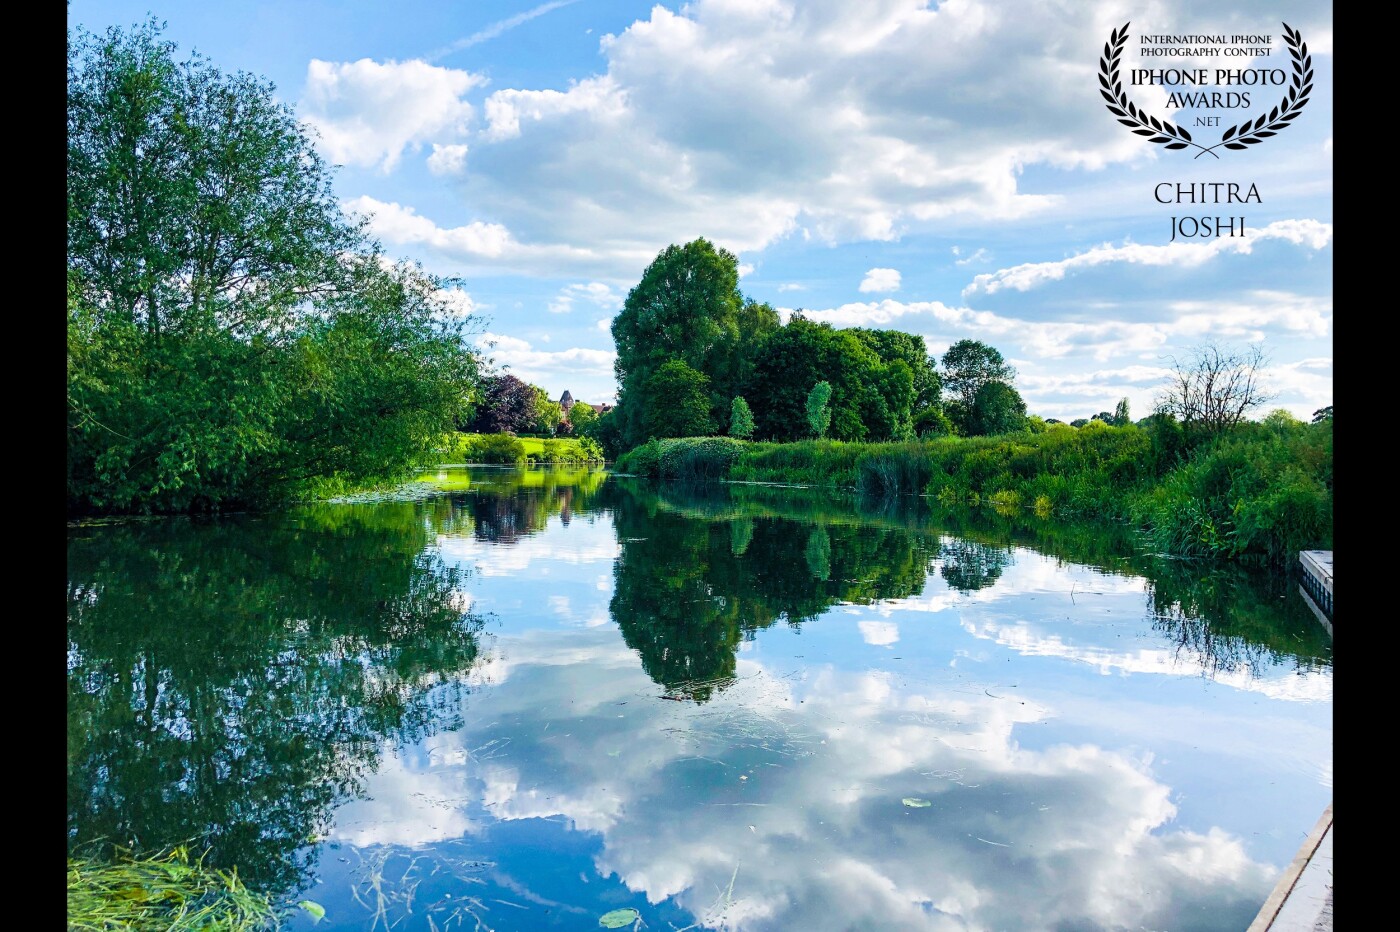 I clicked this beautiful scene at St.Nicholas Park, Warwick, United Kingdom where I used to go for a walk and sit down near Avon river to reflect on myself through the reflection of nature. "Nature admiring herself in the mirror"!